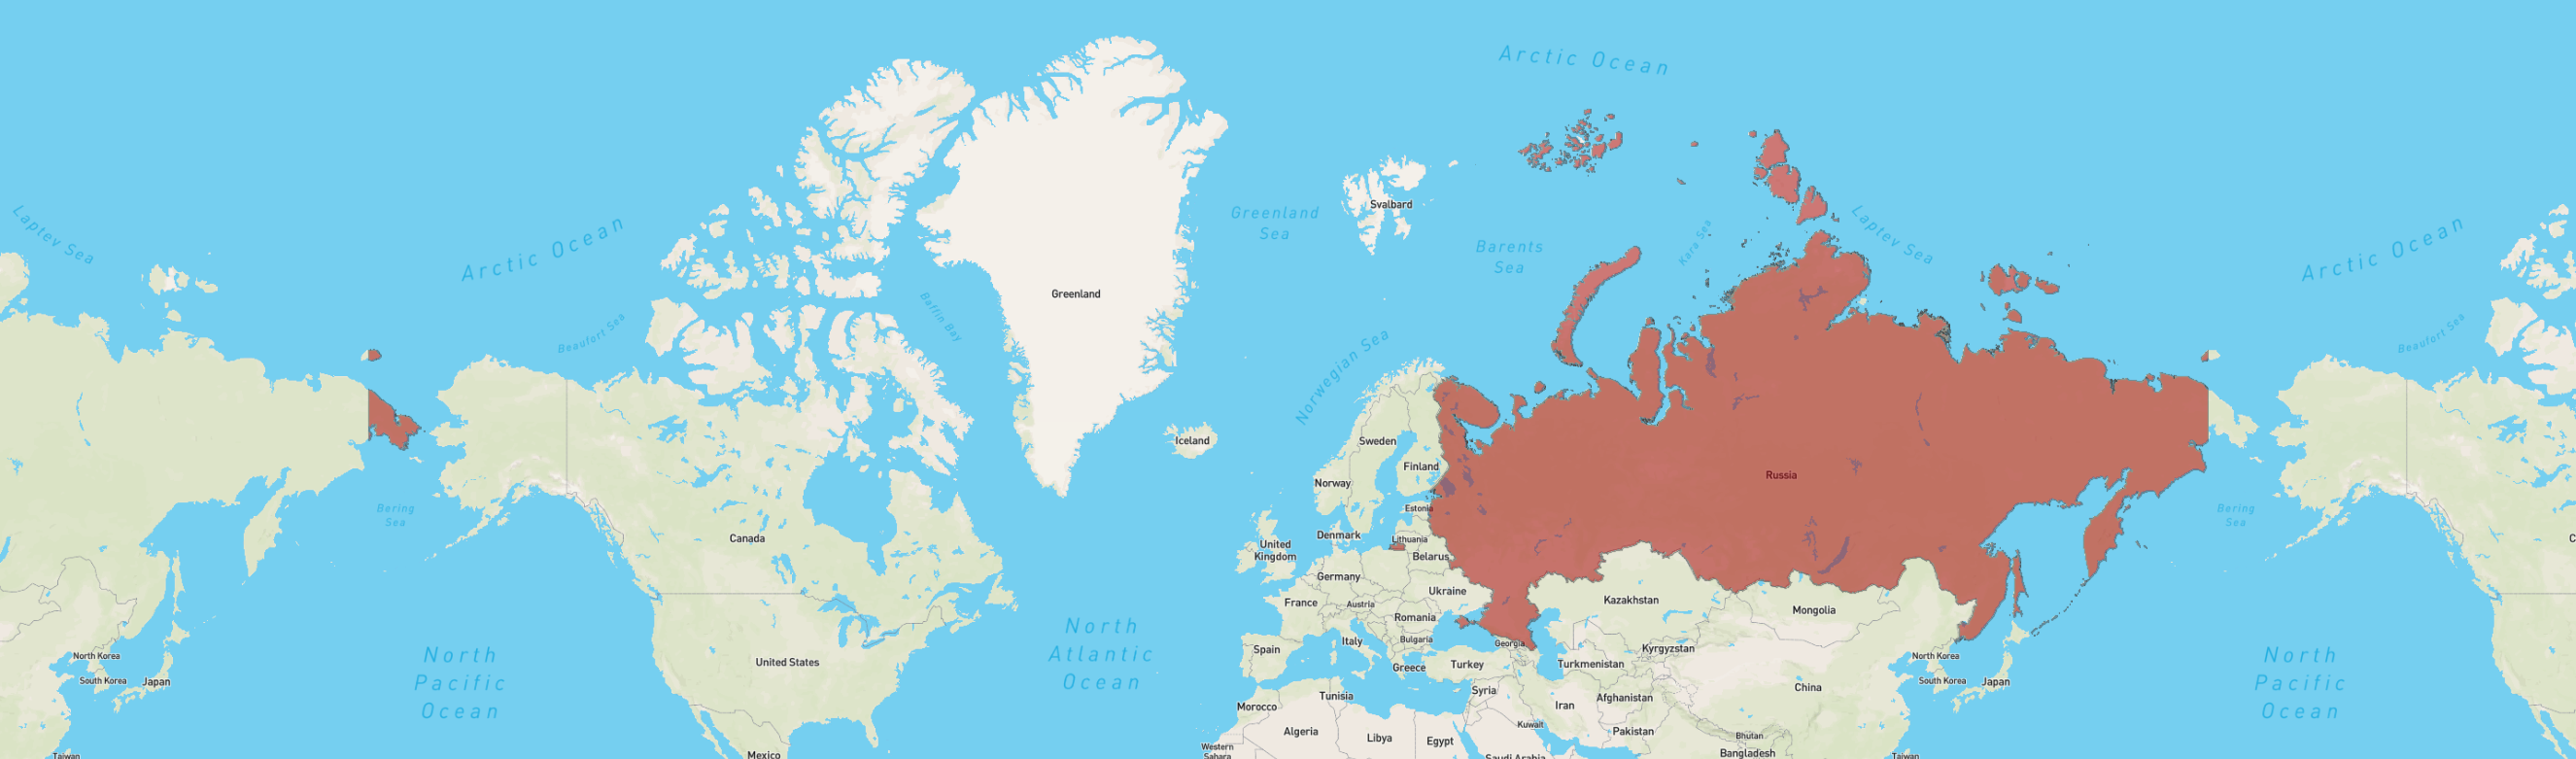 Total area of the russian federation. North Russian Federation. Россия как Федерация. Carbon SUPERSITES Russian federaation.